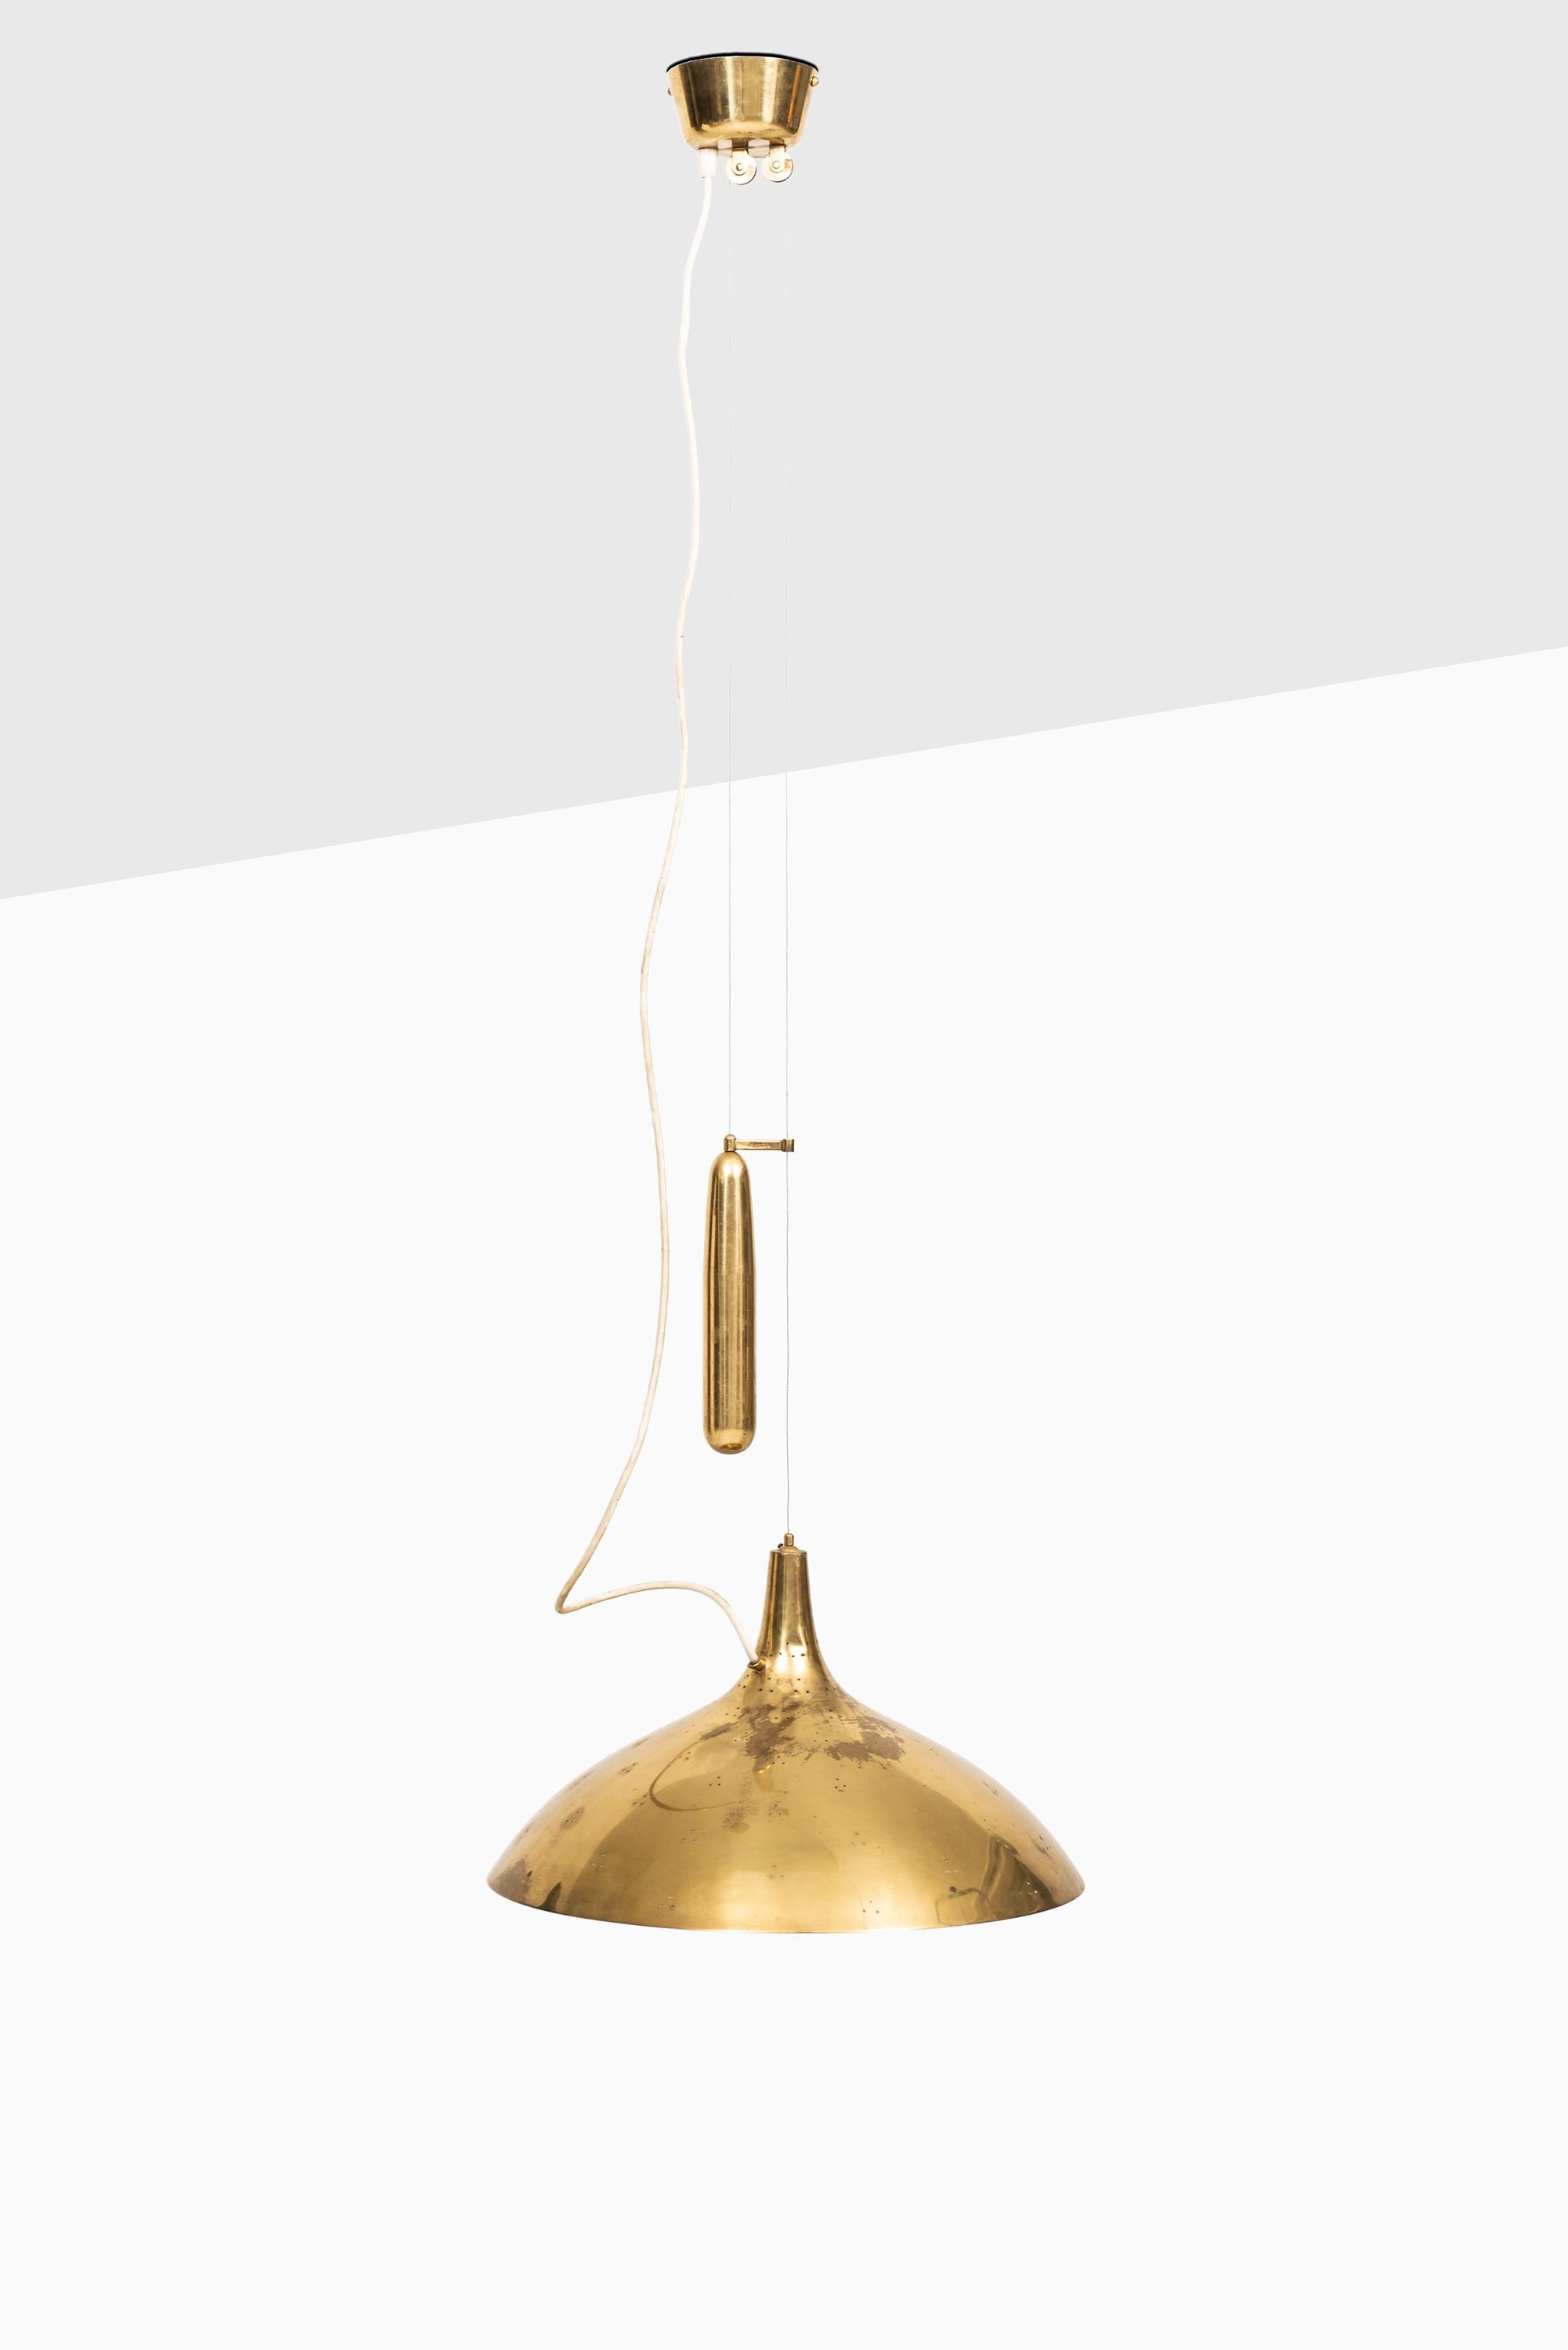 Finnish Paavo Tynell Ceiling Lamp Model A1965 by Idman in Finland